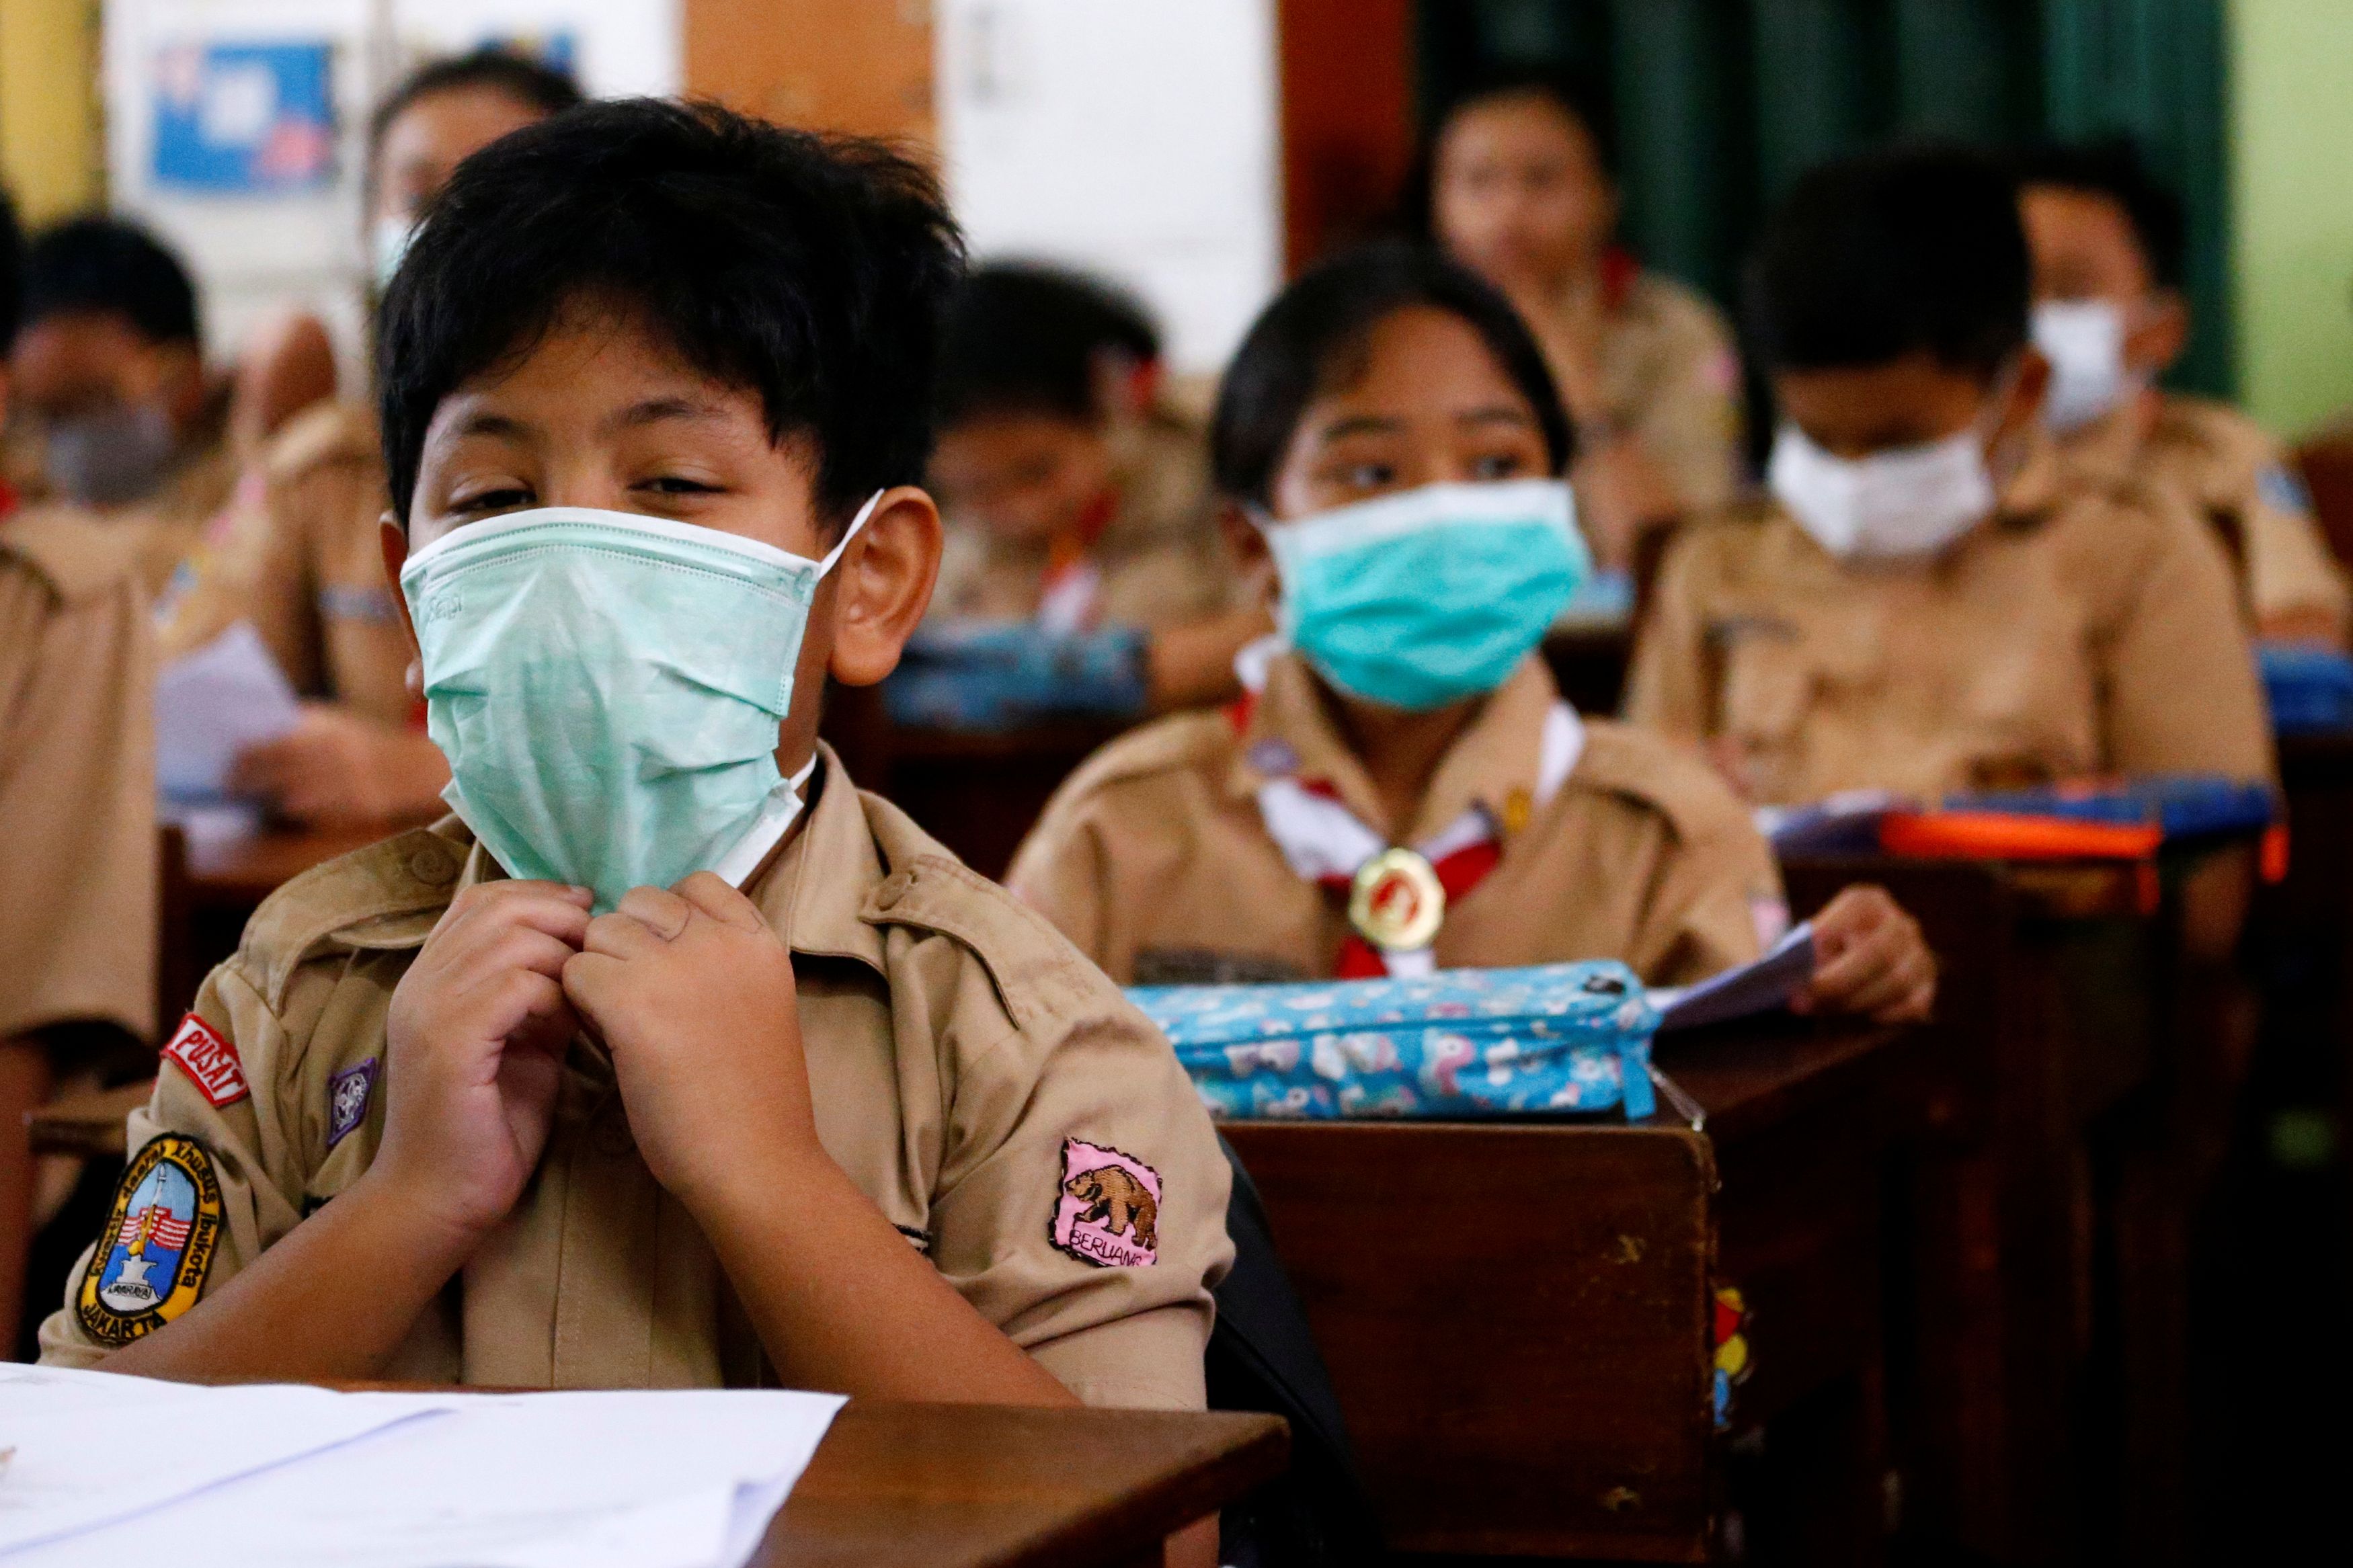 Students wear protective masks in school after Indonesia confirmed its first cases of the novel coronavirus disease of COVID-19, in Jakarta